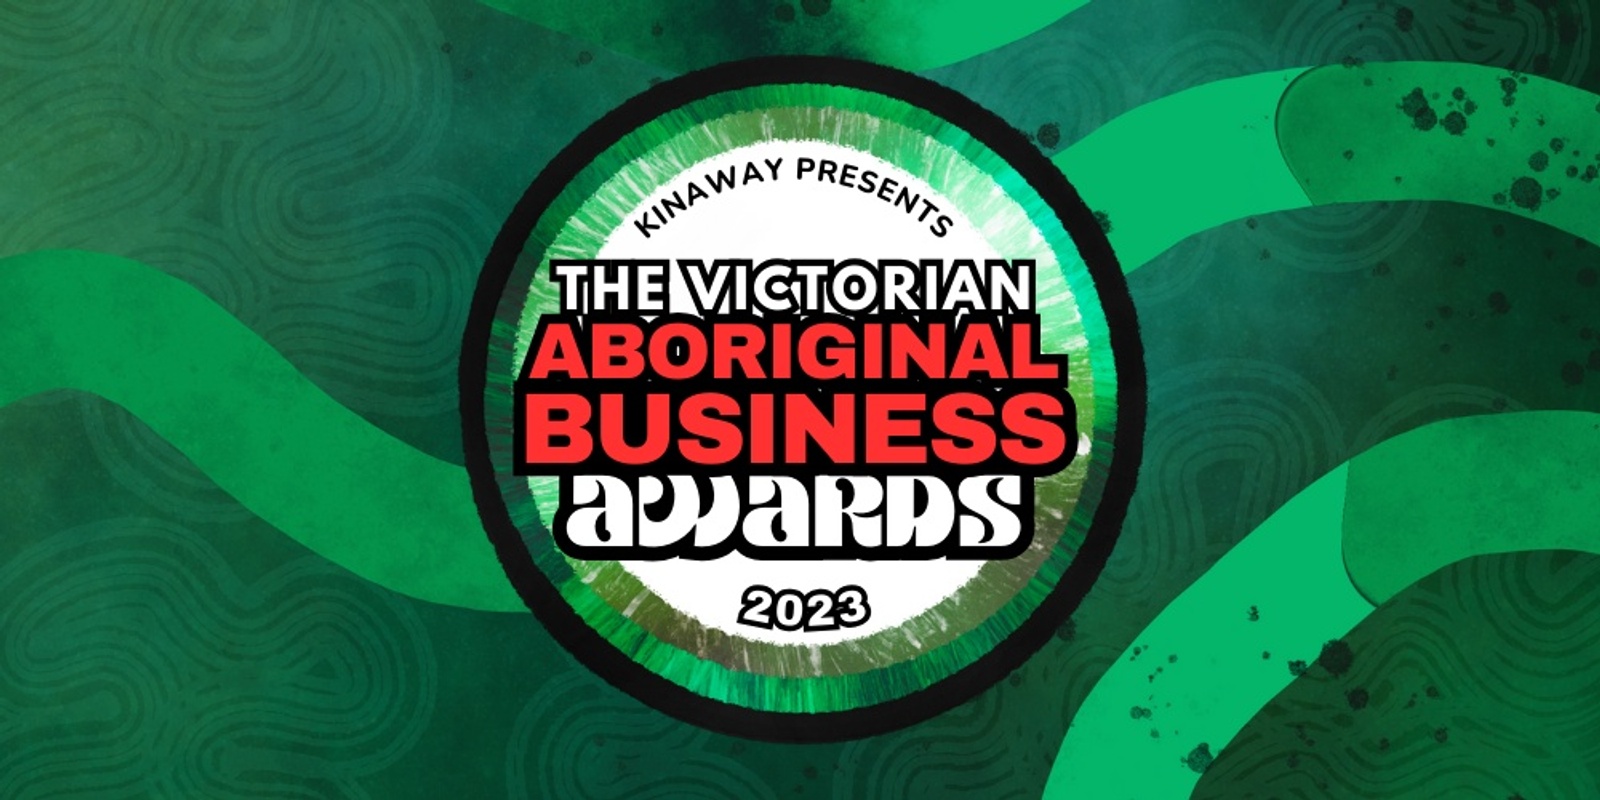 Banner image for Kinaway Presents: The Victorian Aboriginal Business Awards 2023